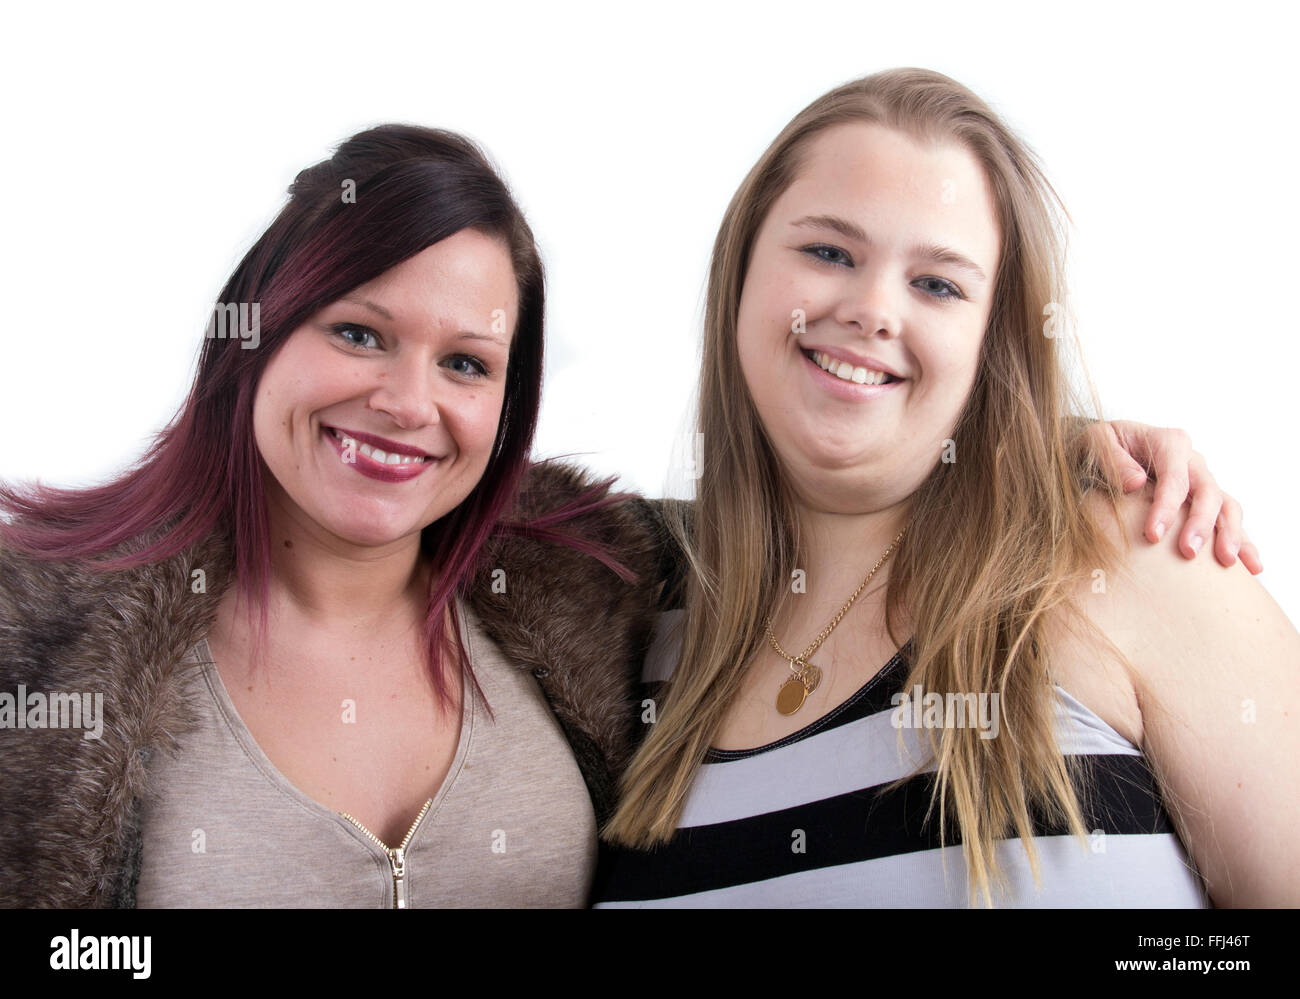 two friends smiling studio shot over white background Stock Photo